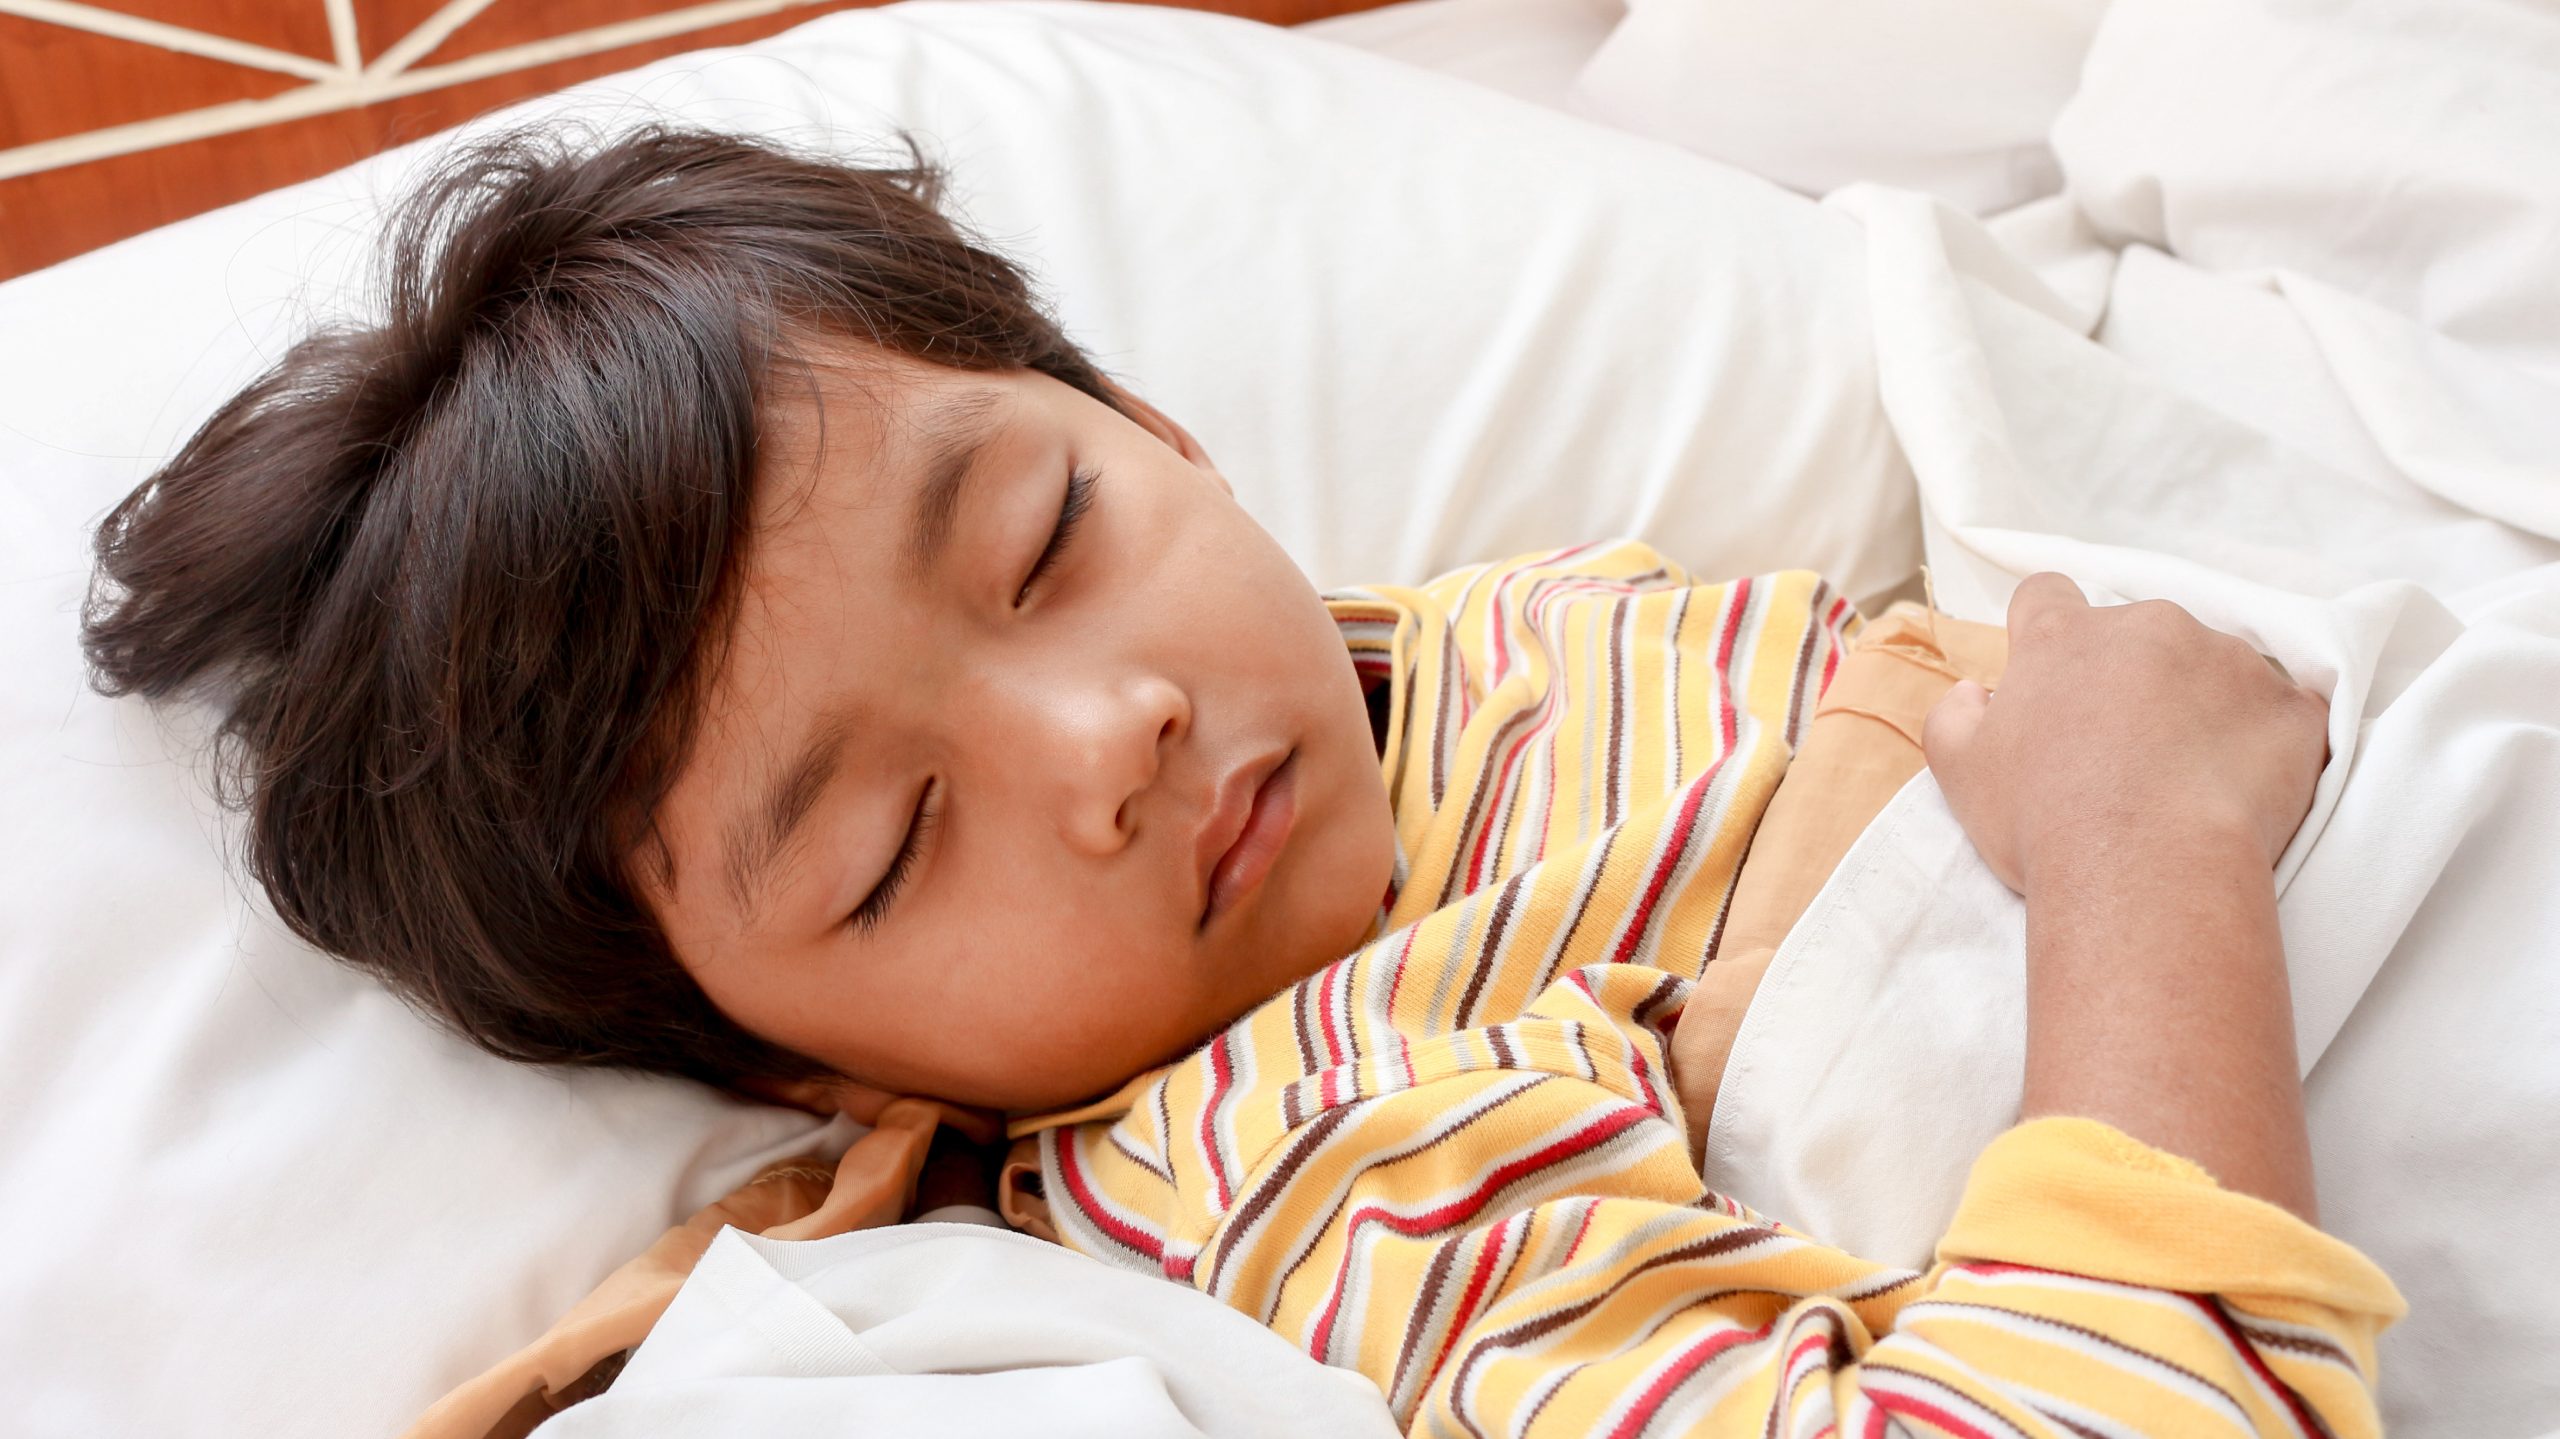 8 Hours of Sleep? Is that Enough for Children?  Here are Tips for a Healthy Sleep Routine for Them